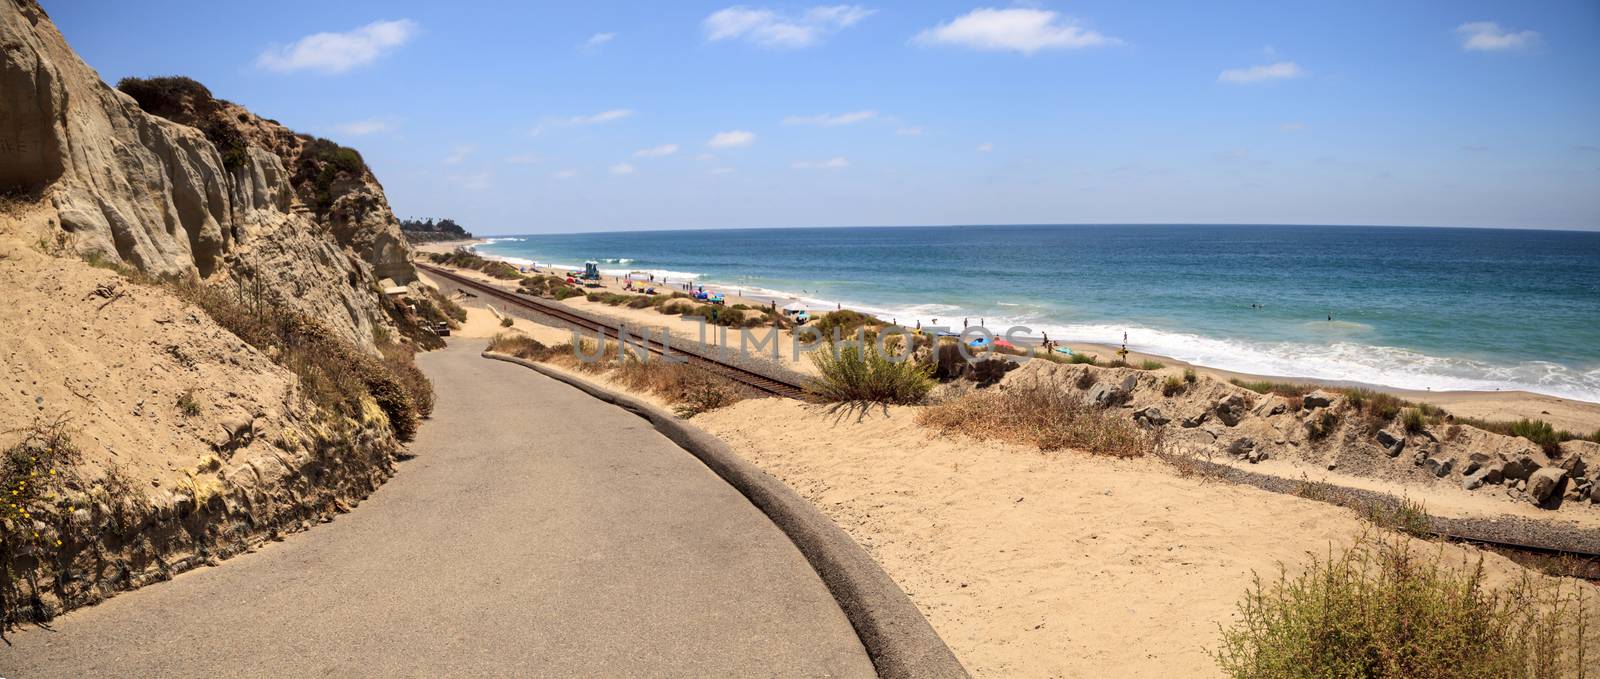 Summer at the San Clemente State Beach in Southern California